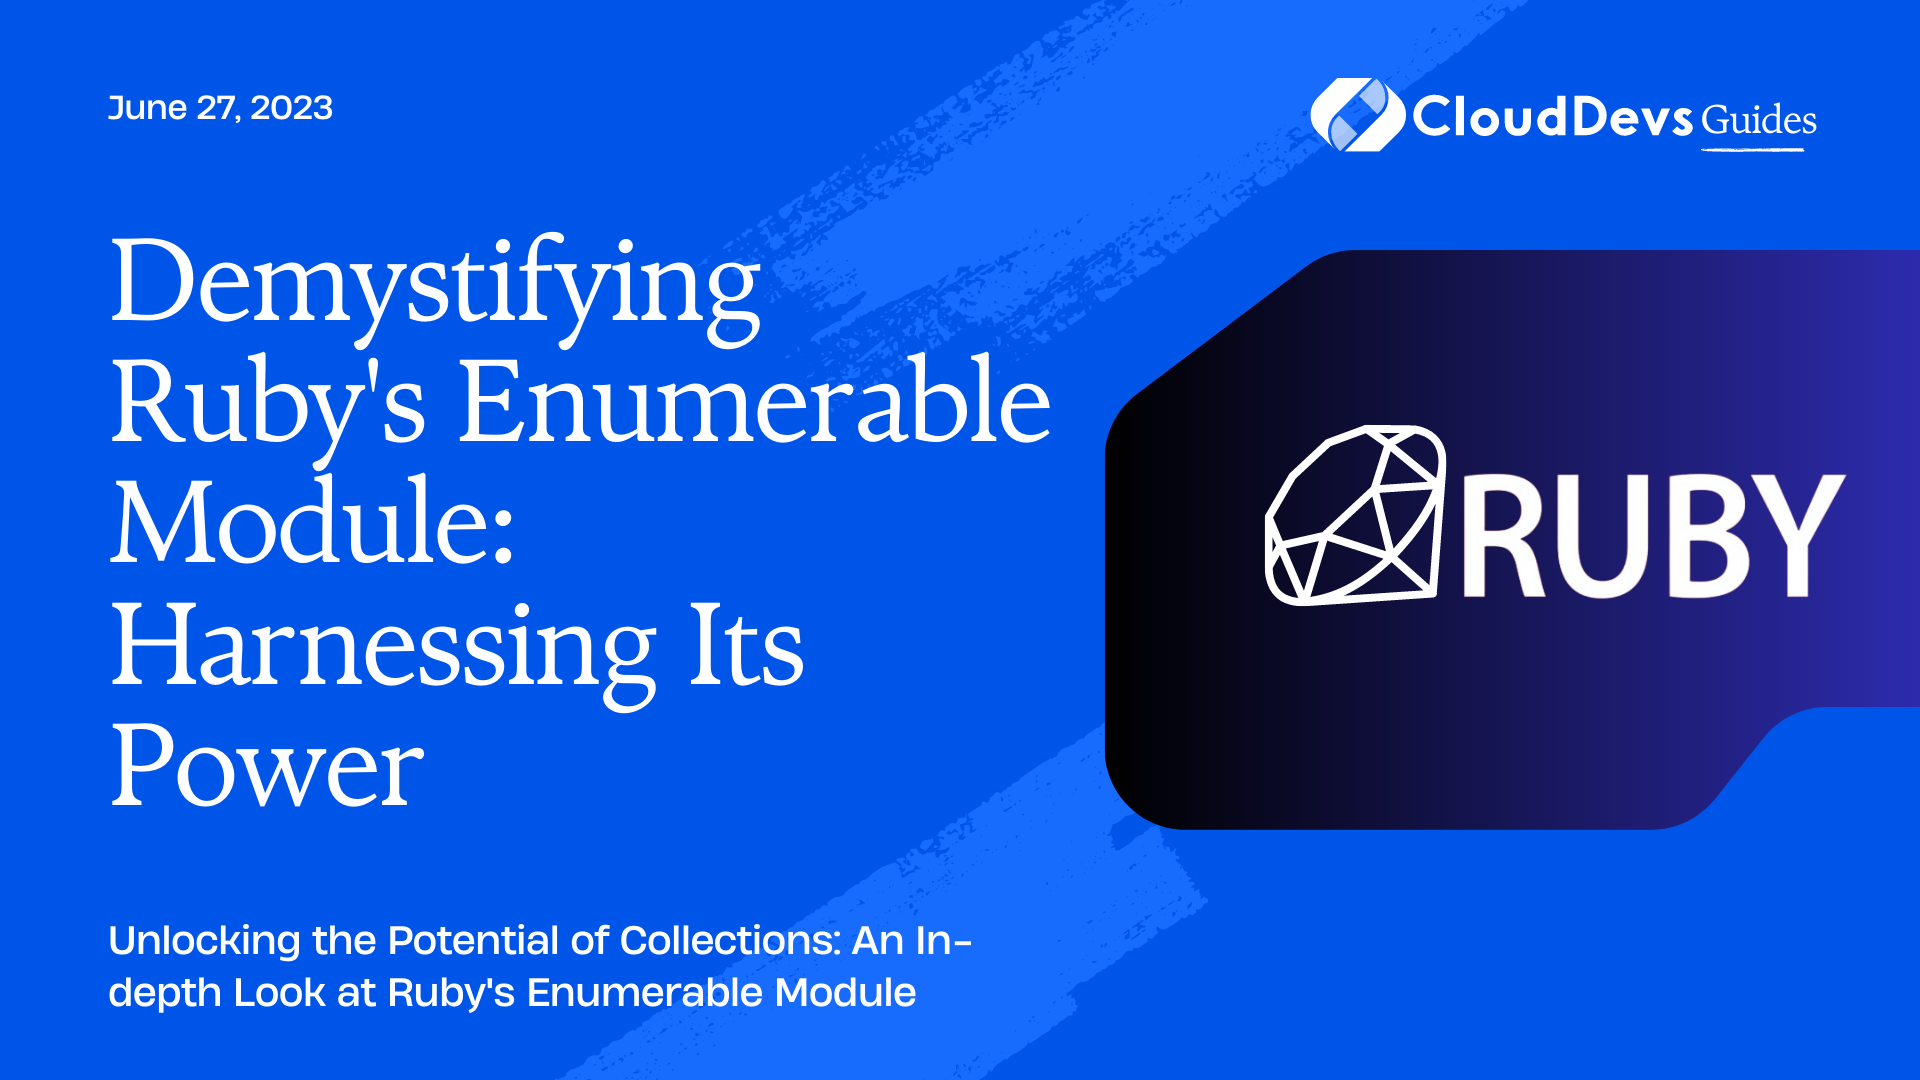 Demystifying Ruby's Enumerable Module: Harnessing Its Power